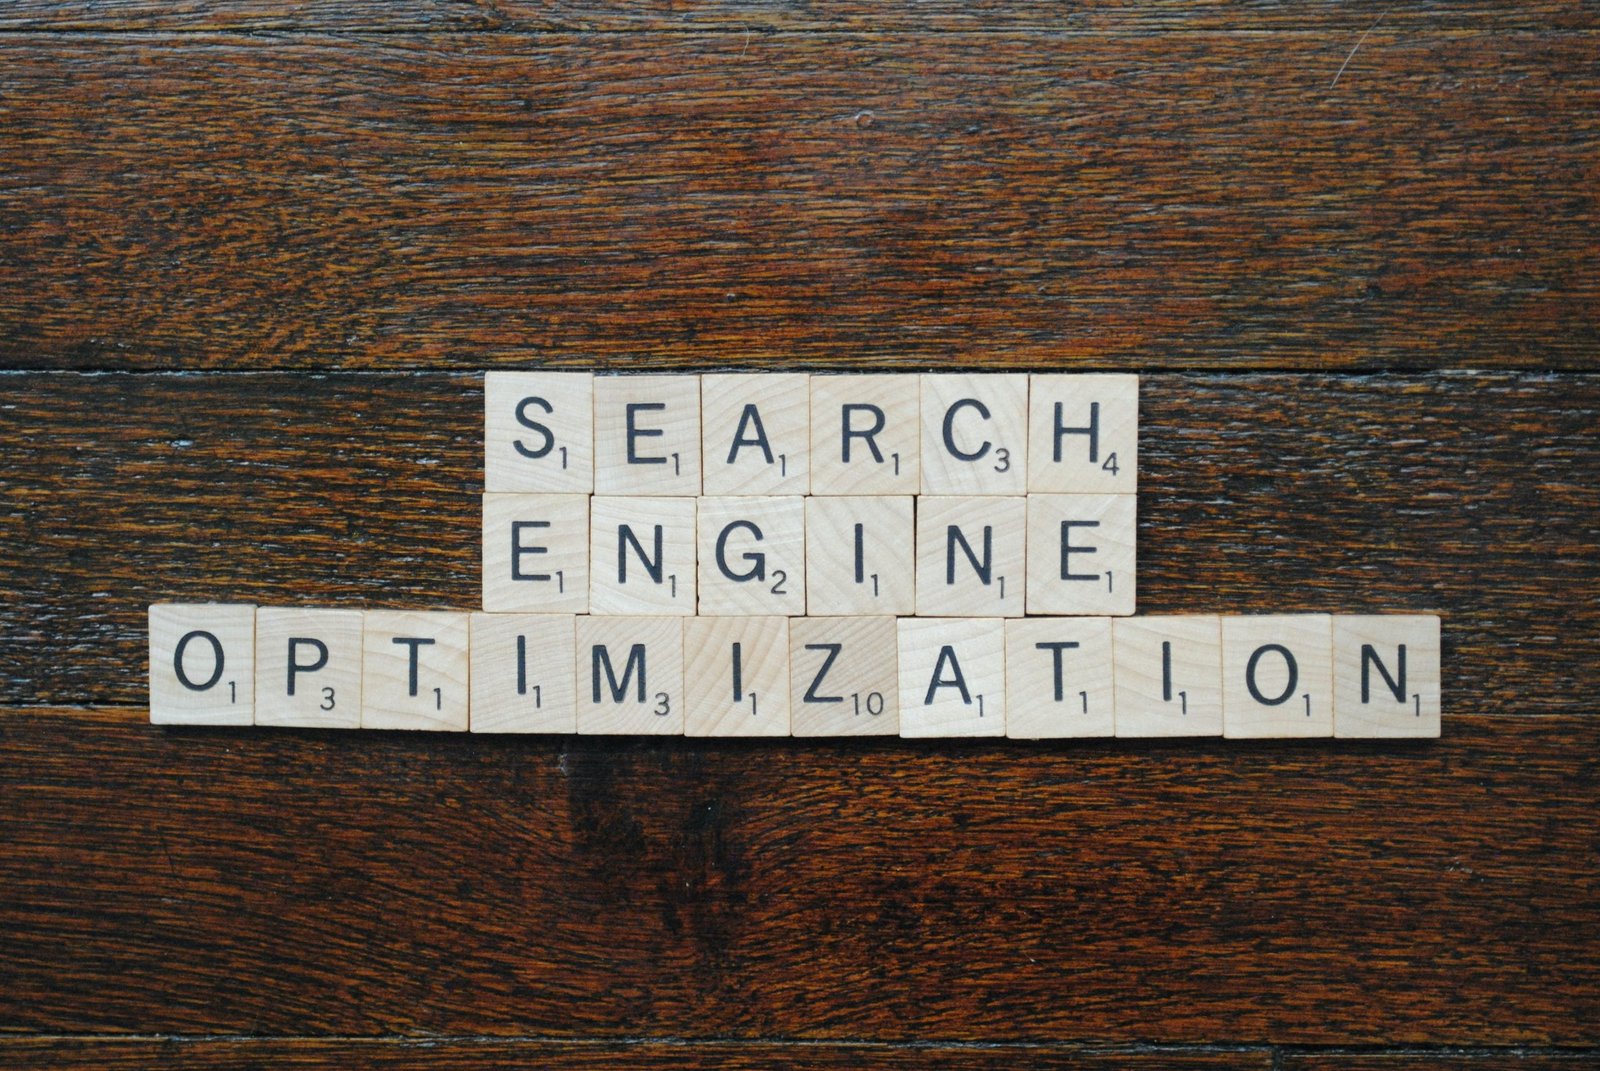 "Search Engine Optimization" spelled using scrabble letters